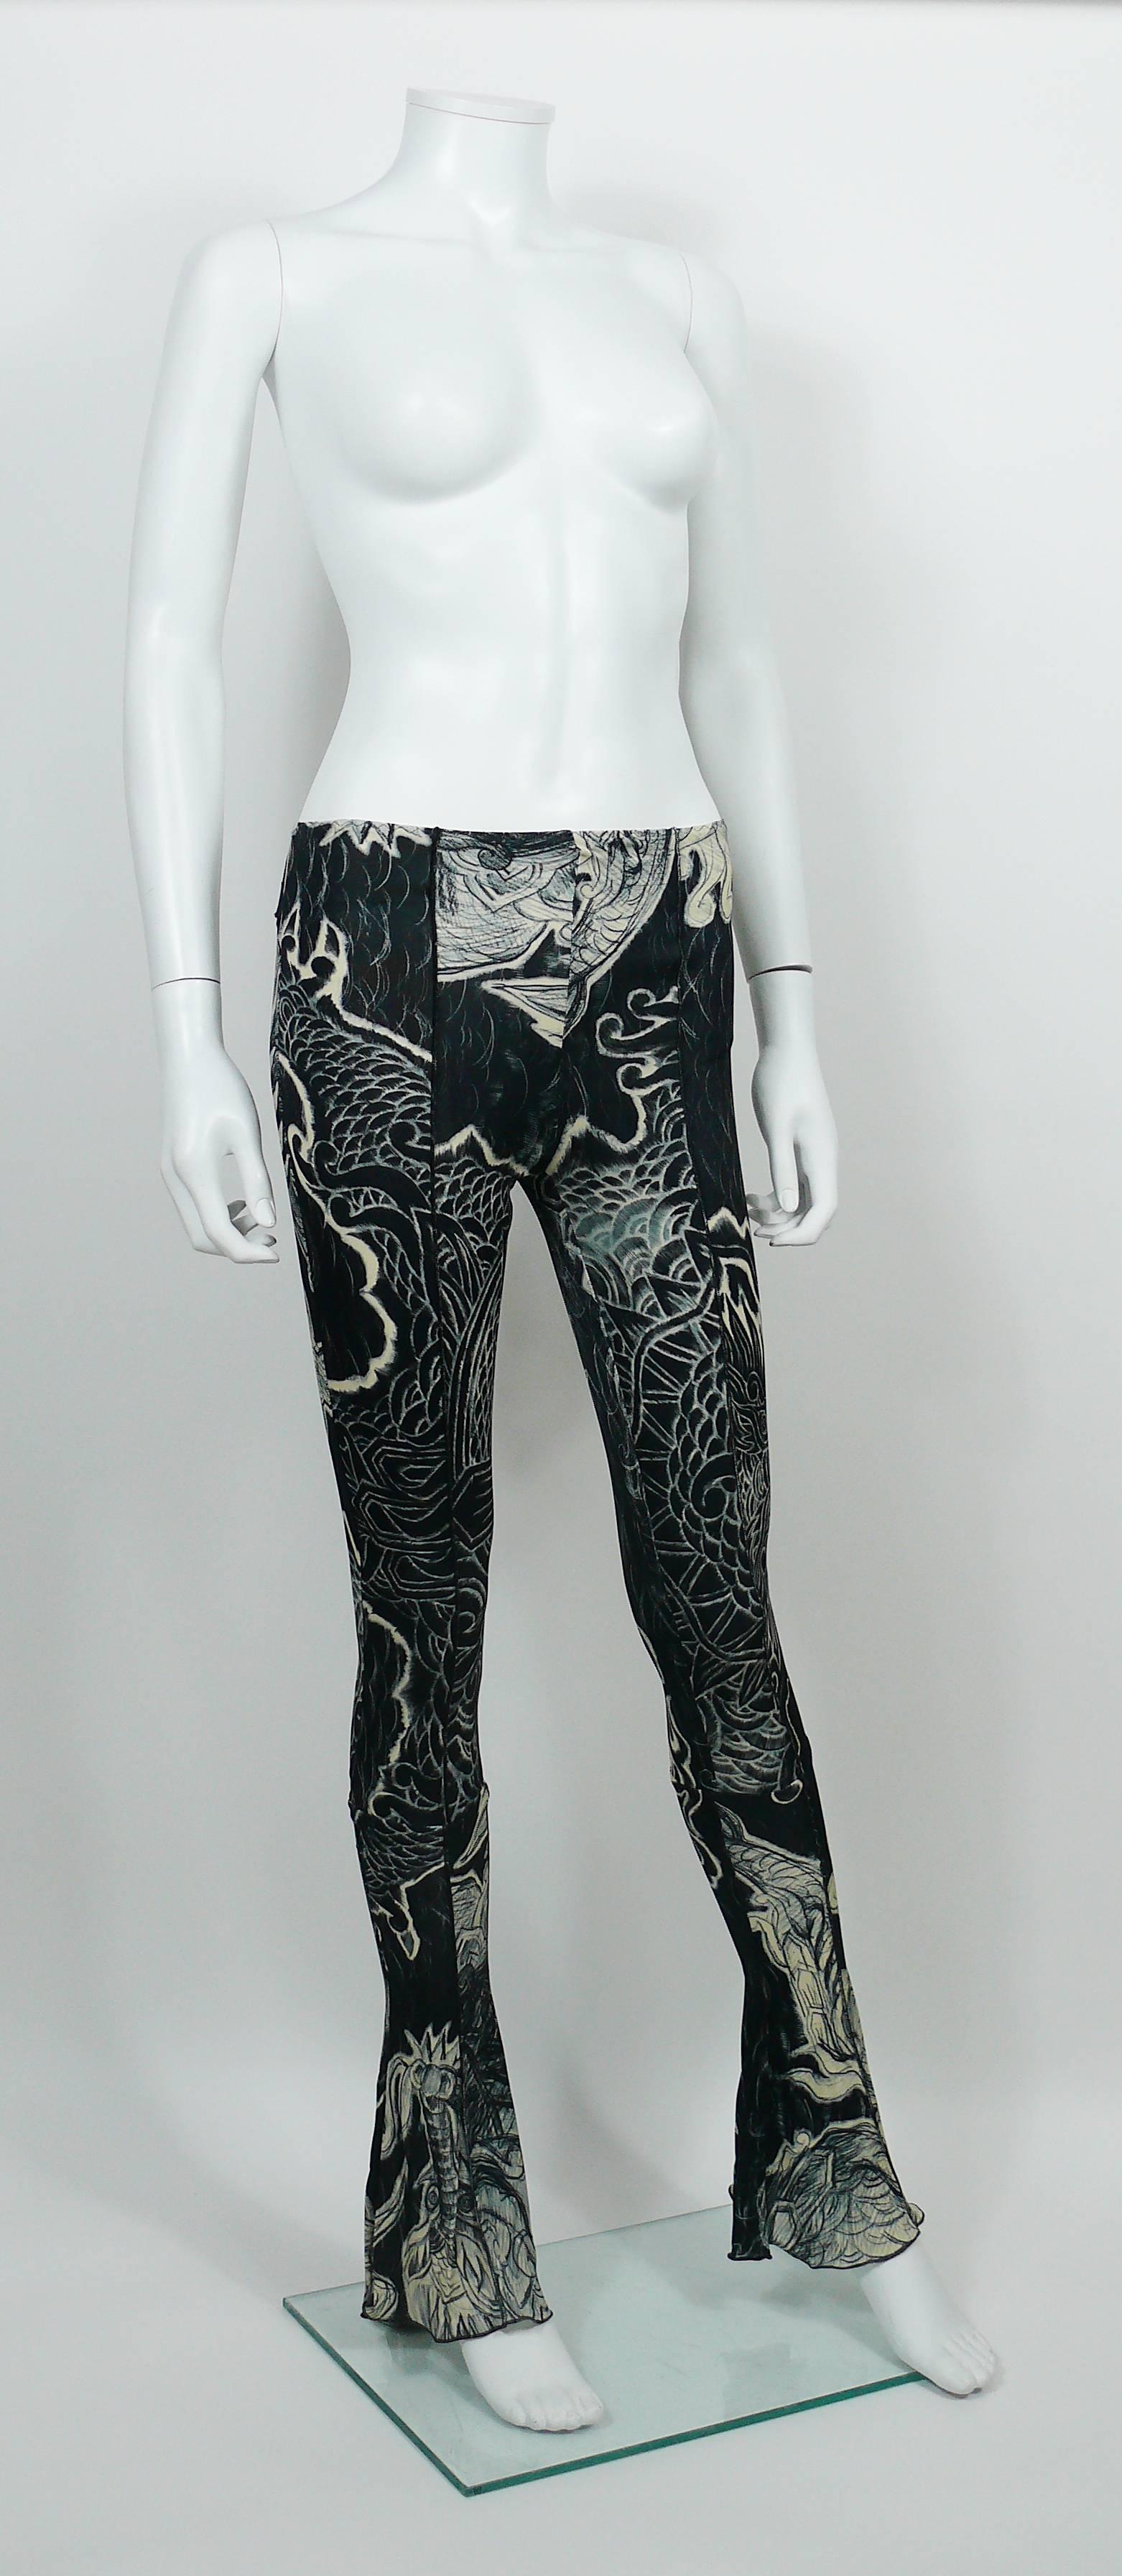 JEAN PAUL GAULTIER stretchy leggings featuring a black and white Japanese inspired tattoo print.

Label reads JEAN PAUL GAULTIER Femme Made in Italy.

Size tag reads : I 40 / D 36 / F 36 / GB 8 / USA 6.
Please refer to measurements.

Composition